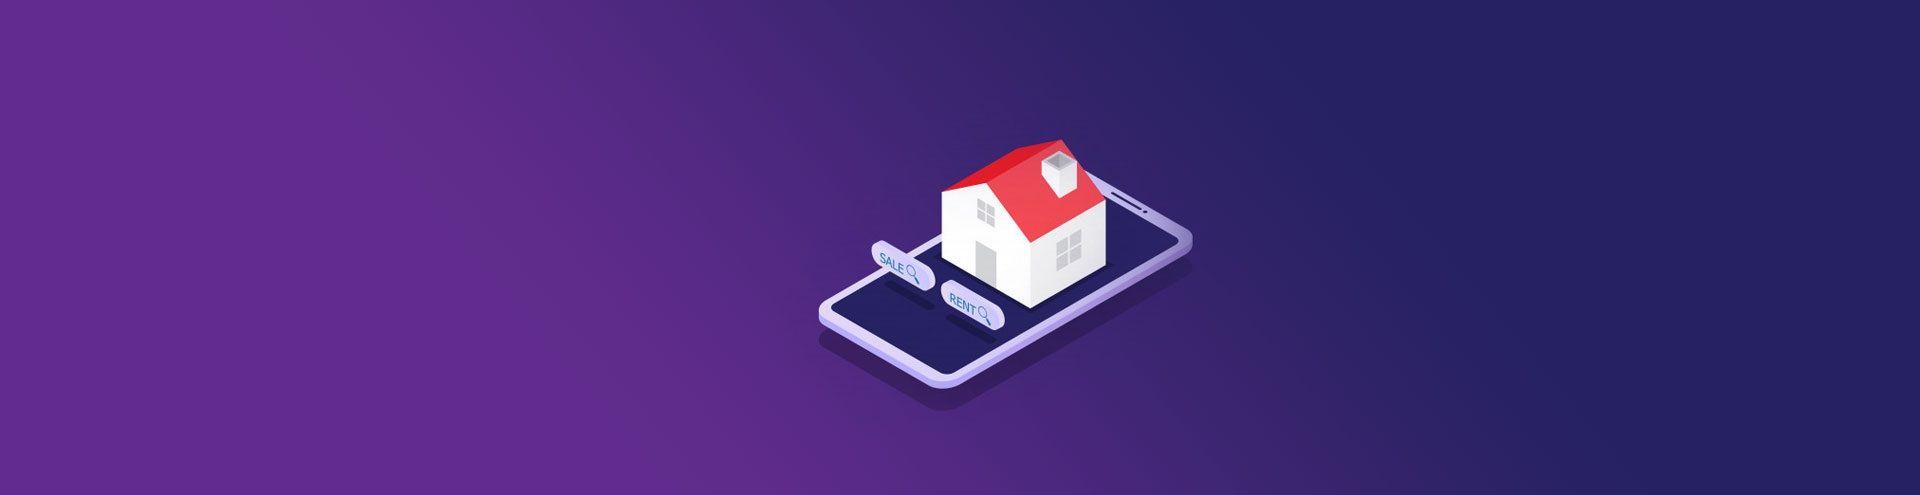 Real Estate Mobile App Development: How to Create the Next Zillow